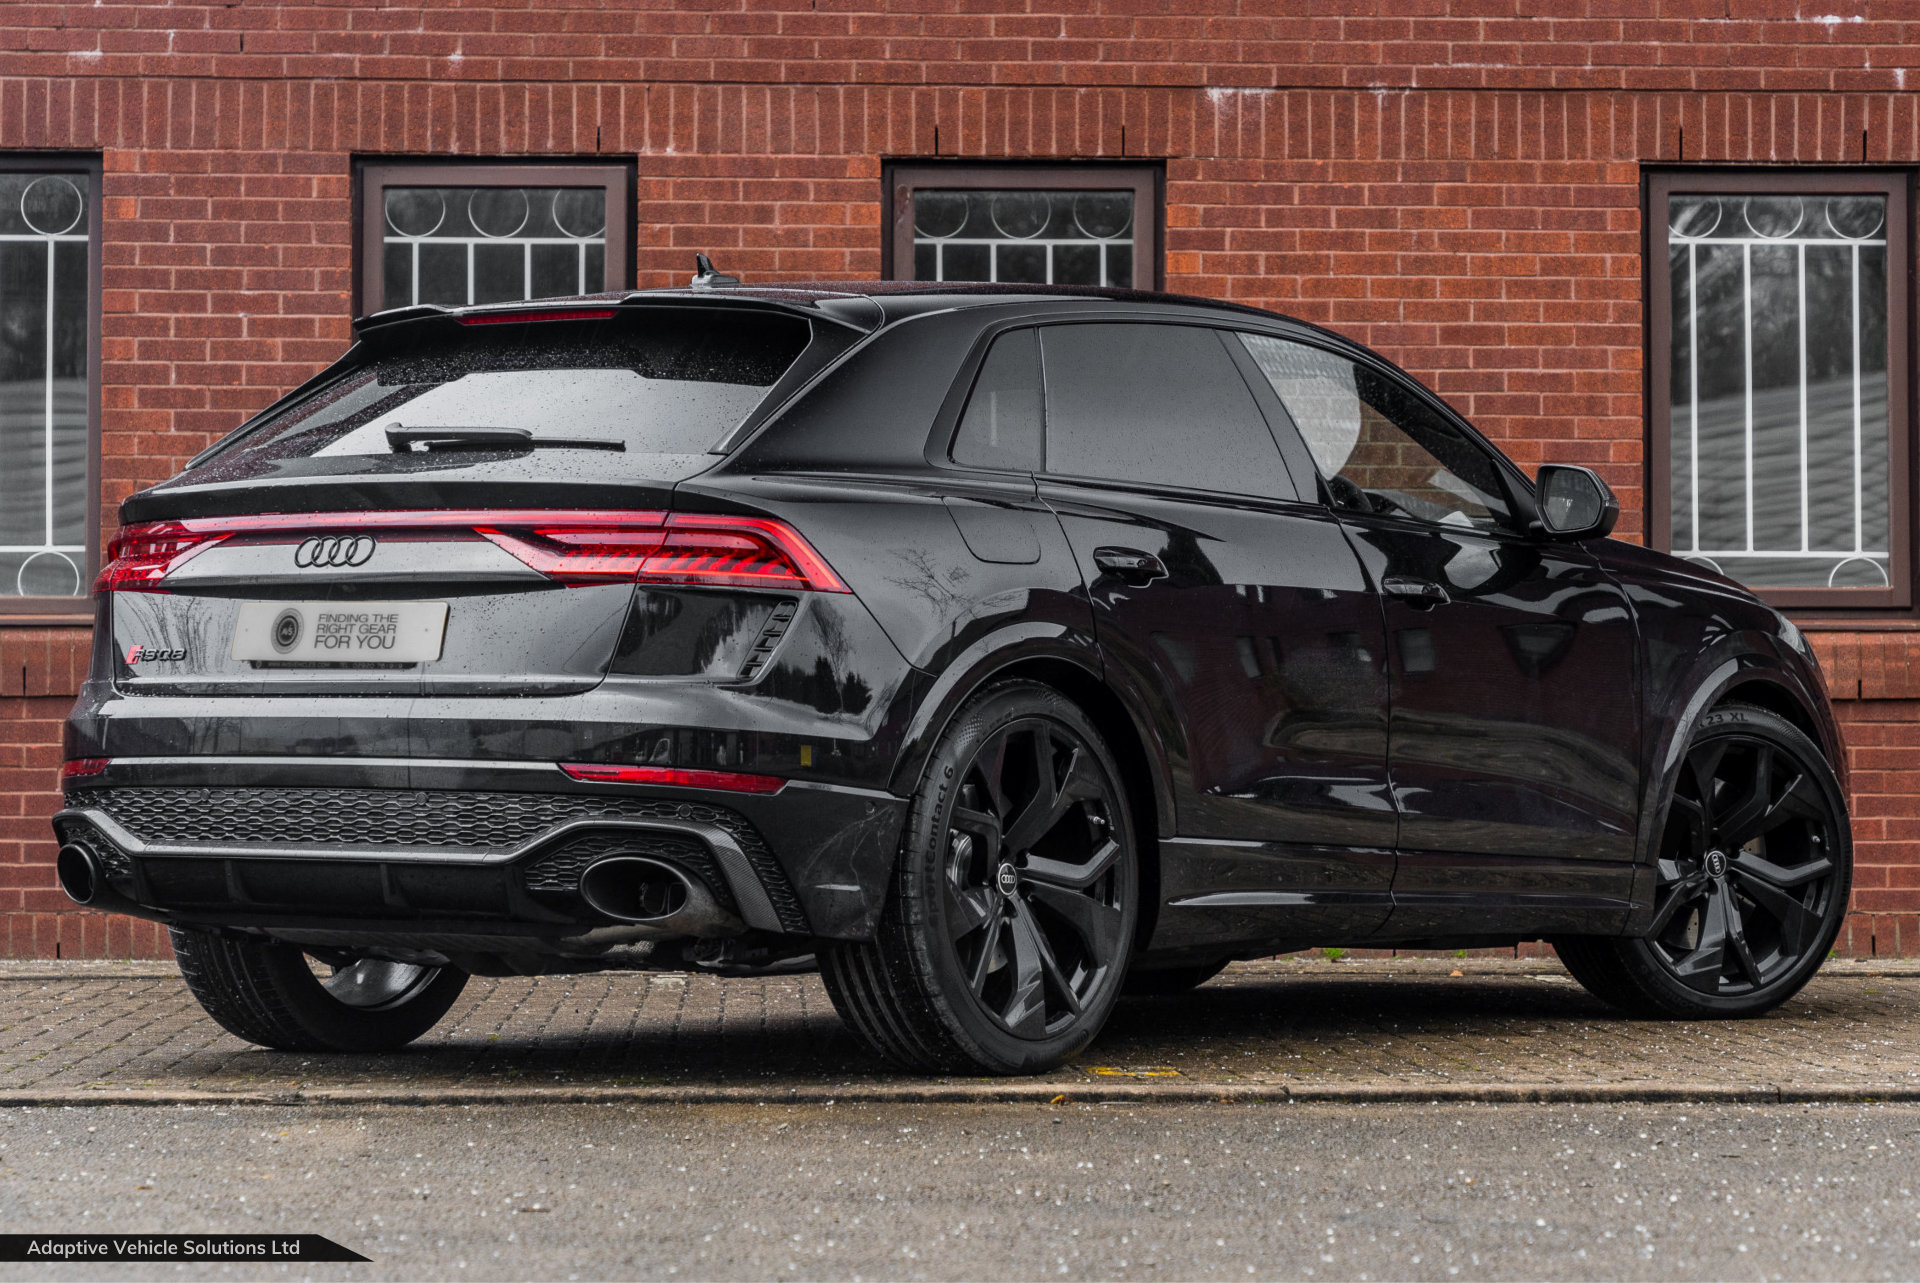 2021 Audi RS Q8 Carbon Edition New Black off side rear black calipers view